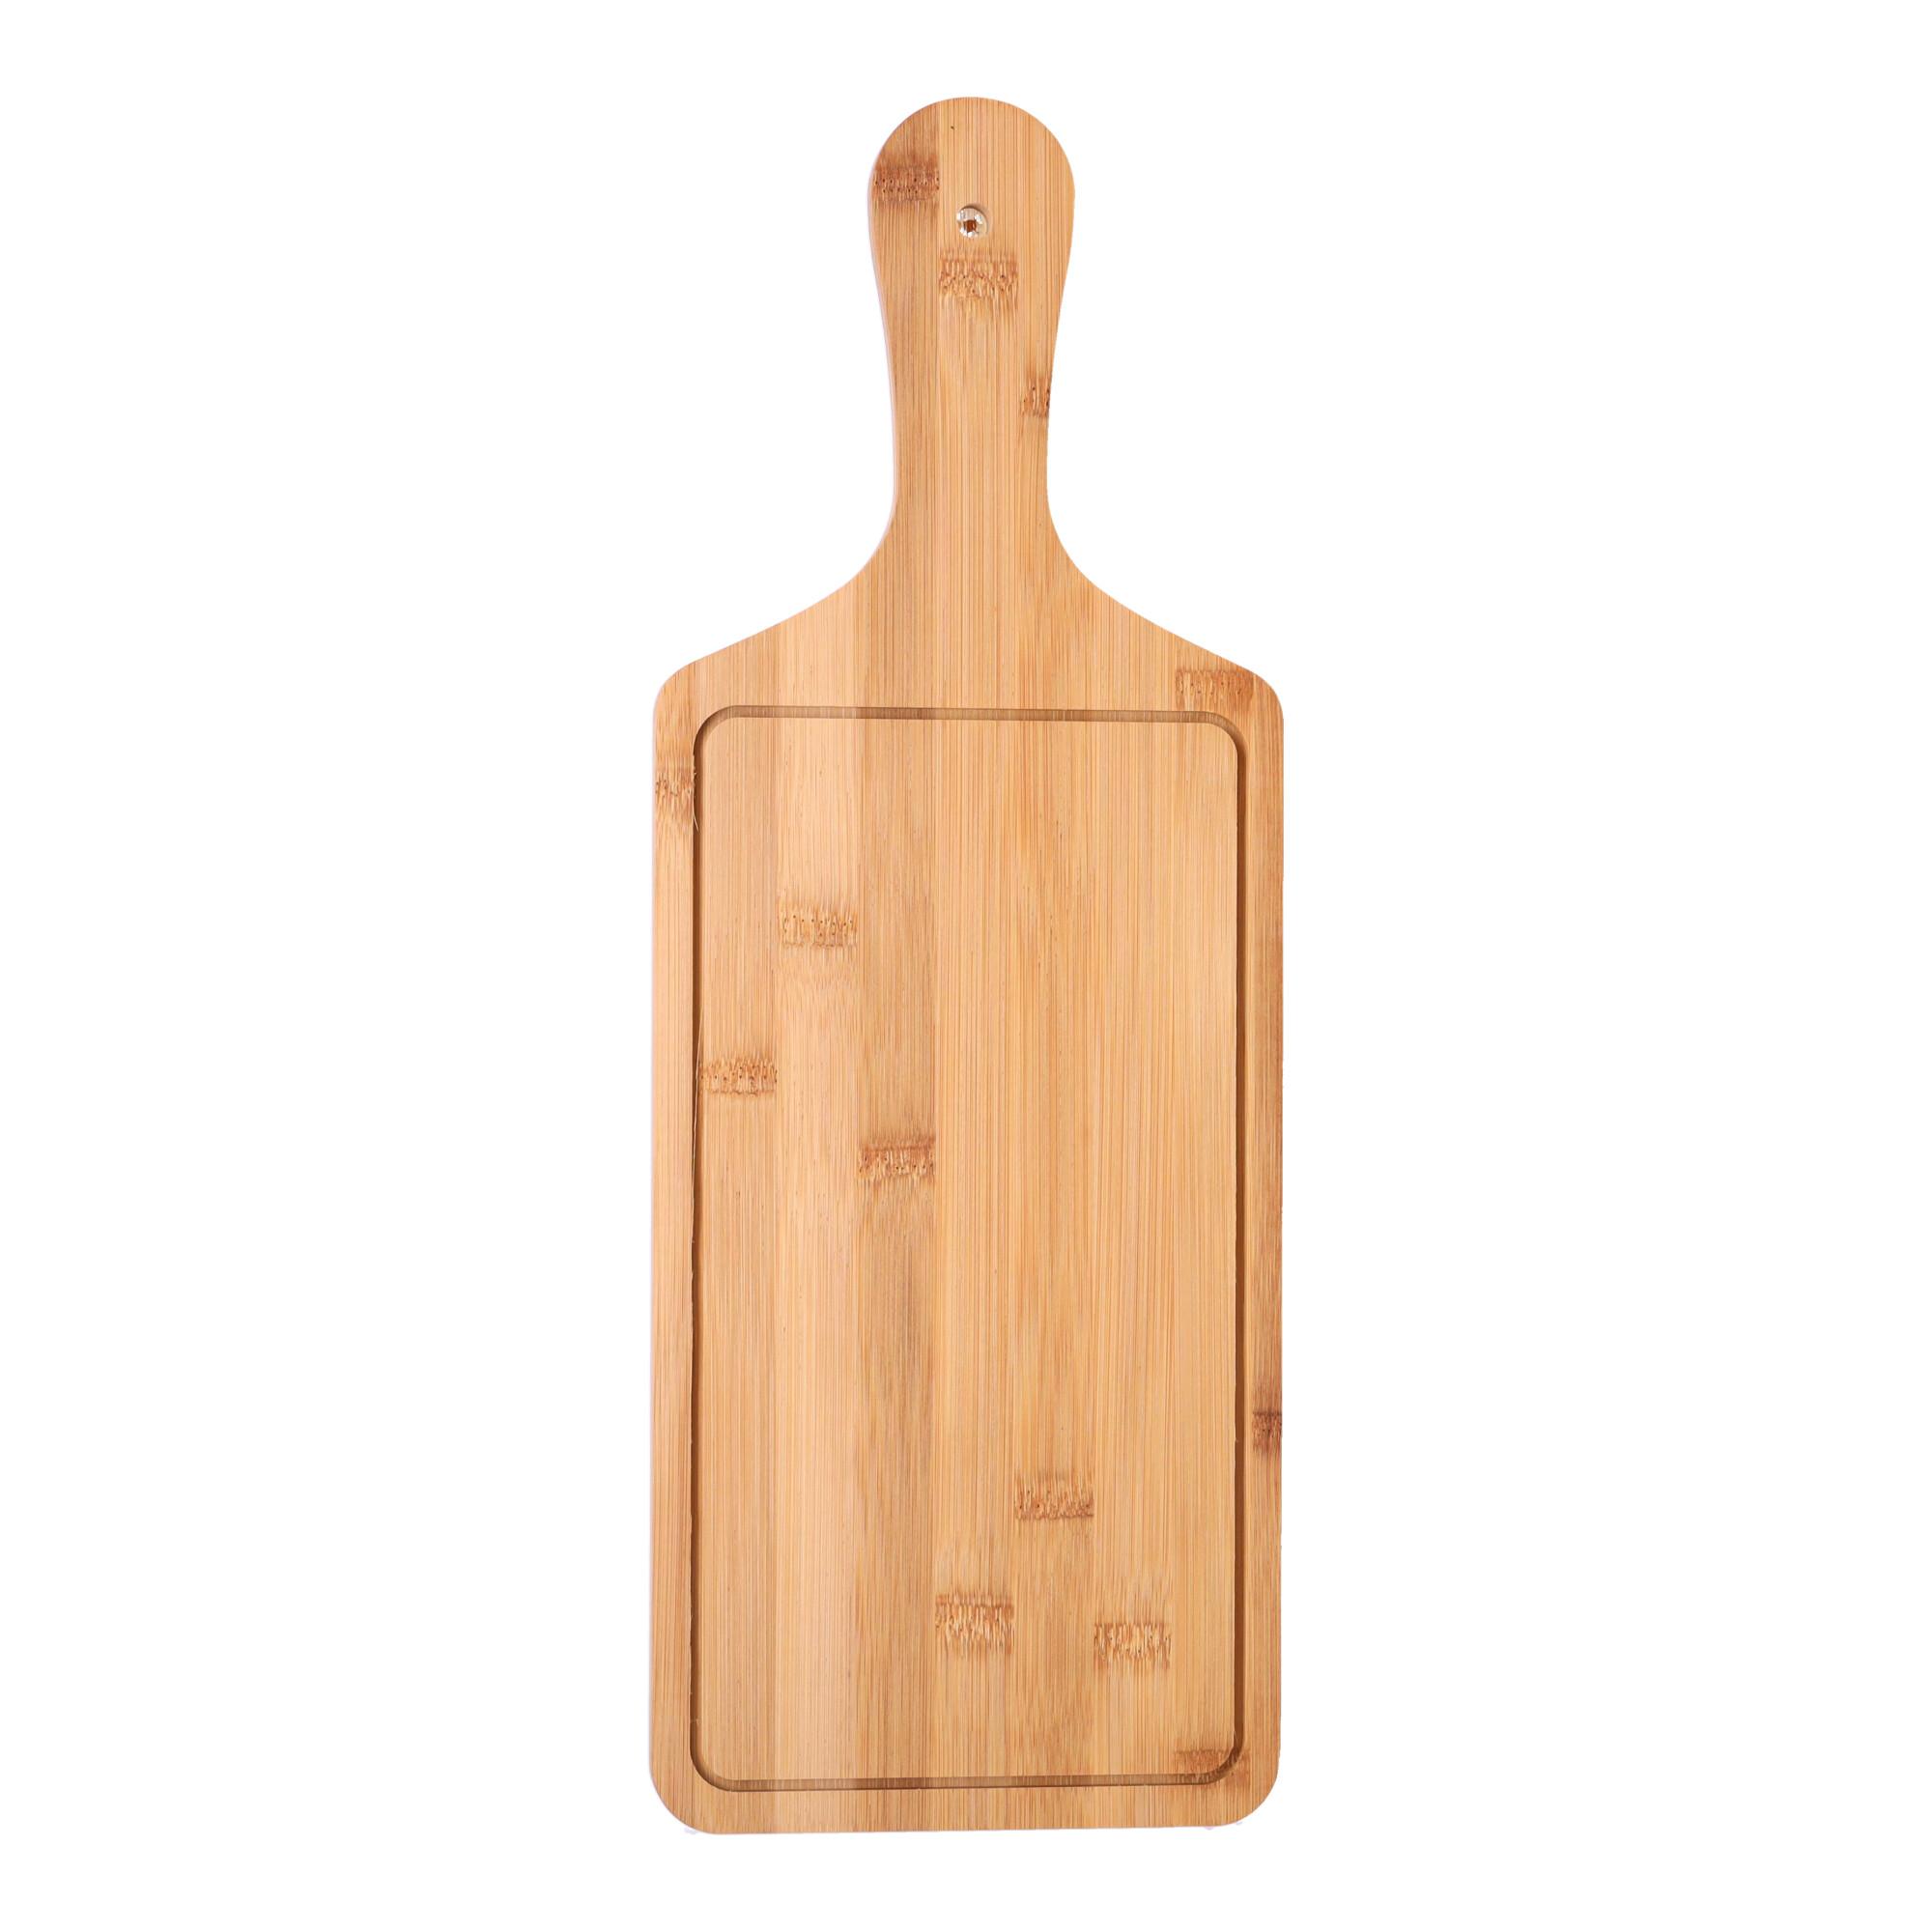 Wooden pizza board - rectangular, large